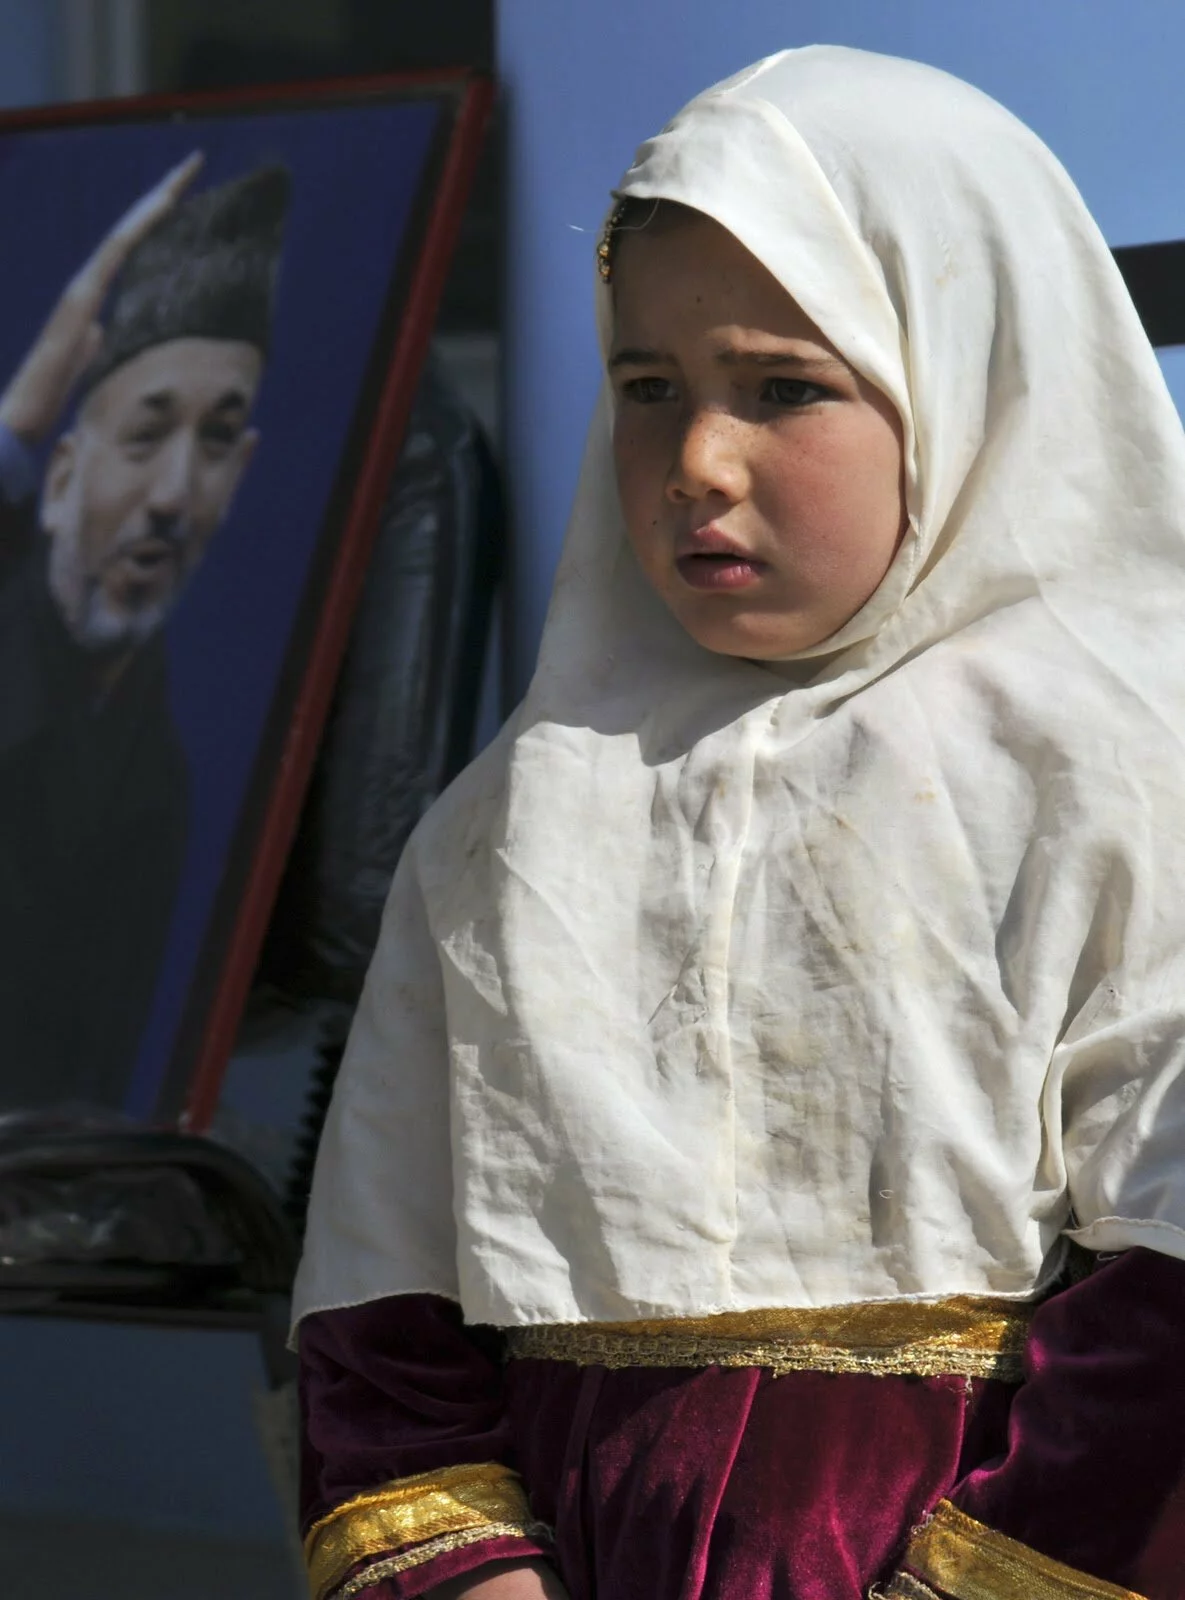 A young Afghan girl stands